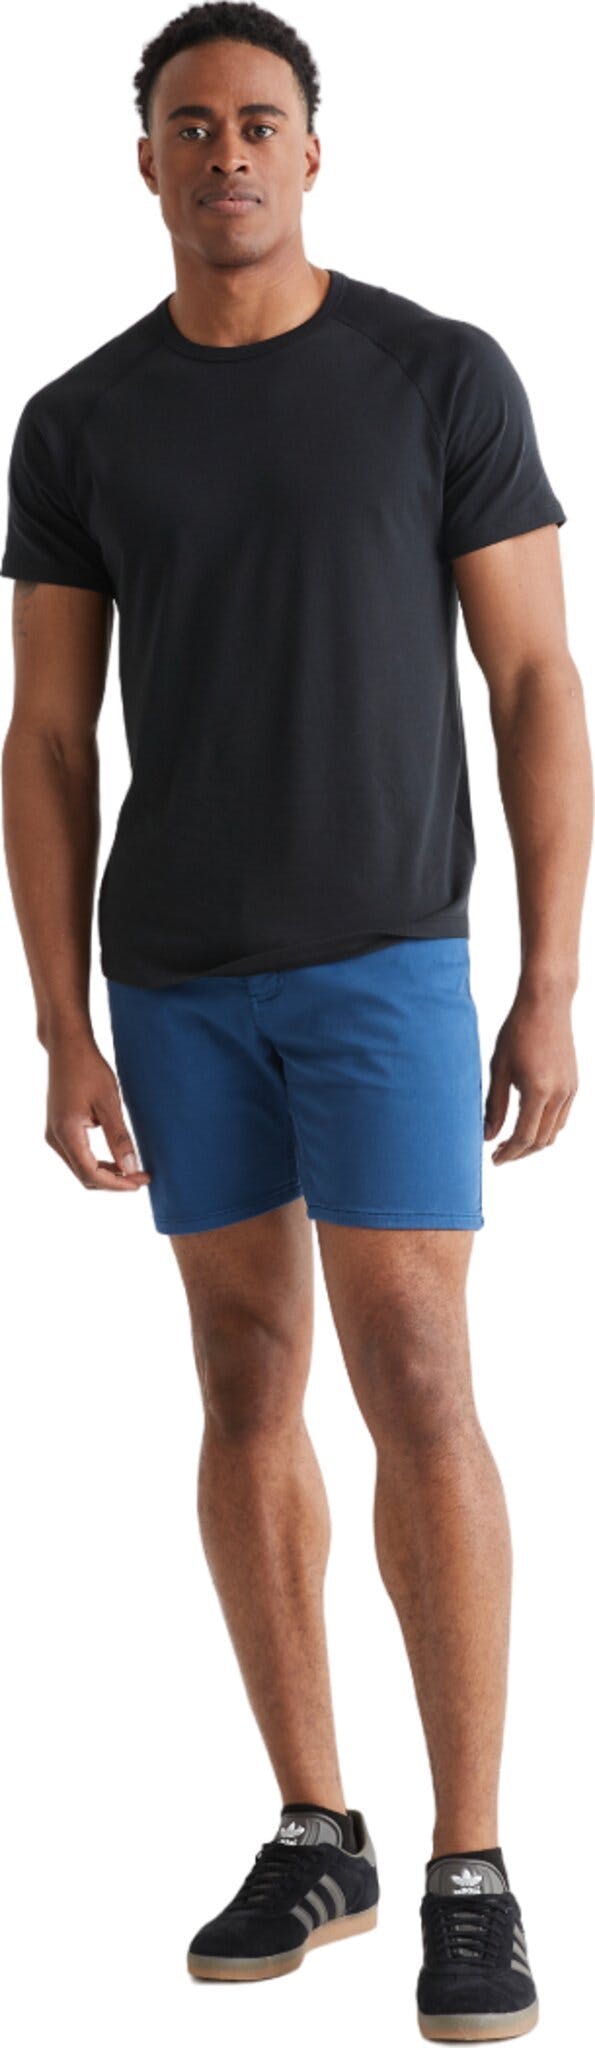 Product image for No Sweat Short - Men's